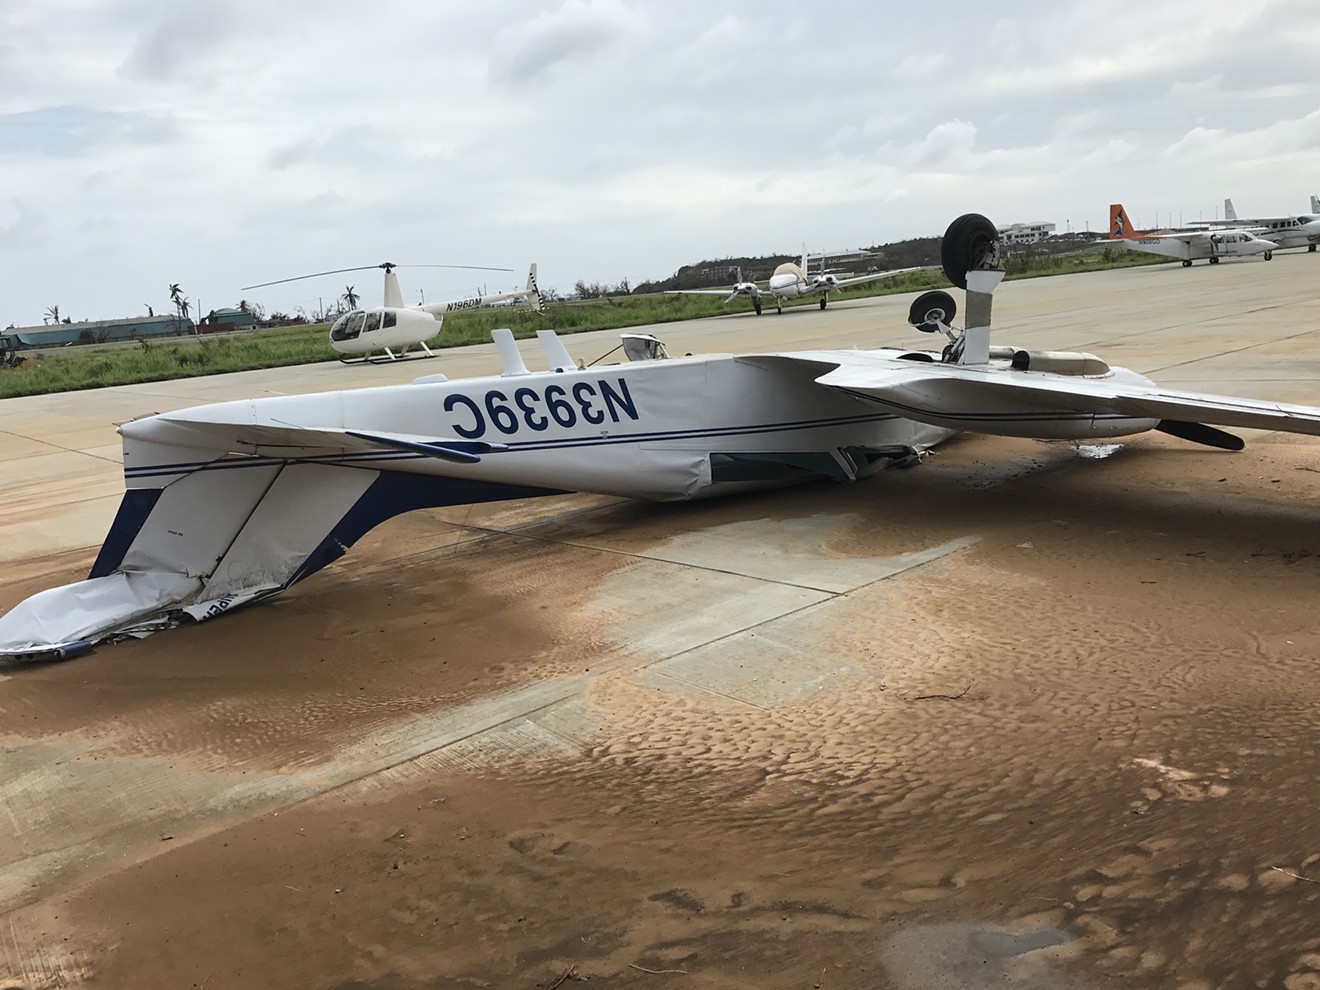 An upside-down plane, flipped by Irma, greets passengers in Saint Thomas.